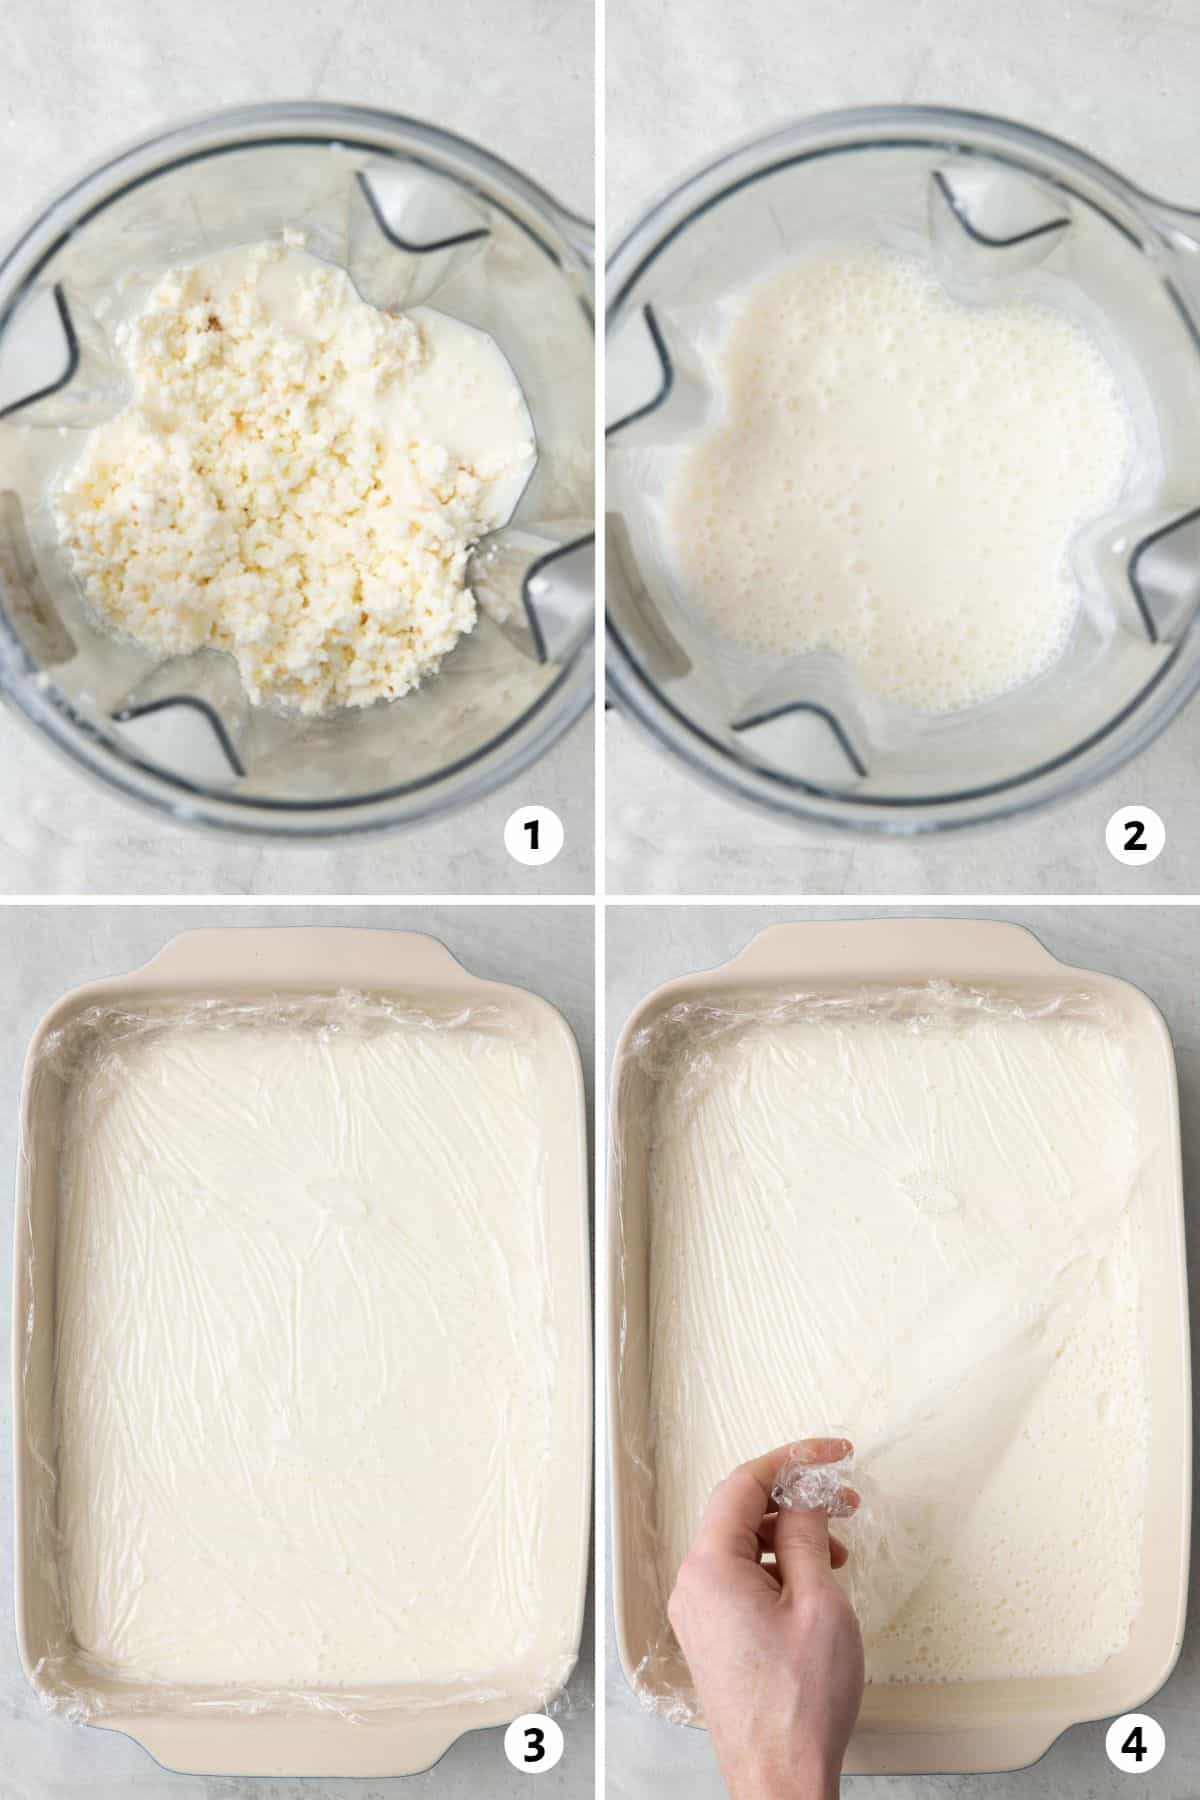 4 image collage finishing recipe: 1- milk curds and ashta cream in a blender before combined, 2- after blended, 3- in a baking dish with plastic wrap pressed onto the surface, 4- after chilled pulling back the plastic.